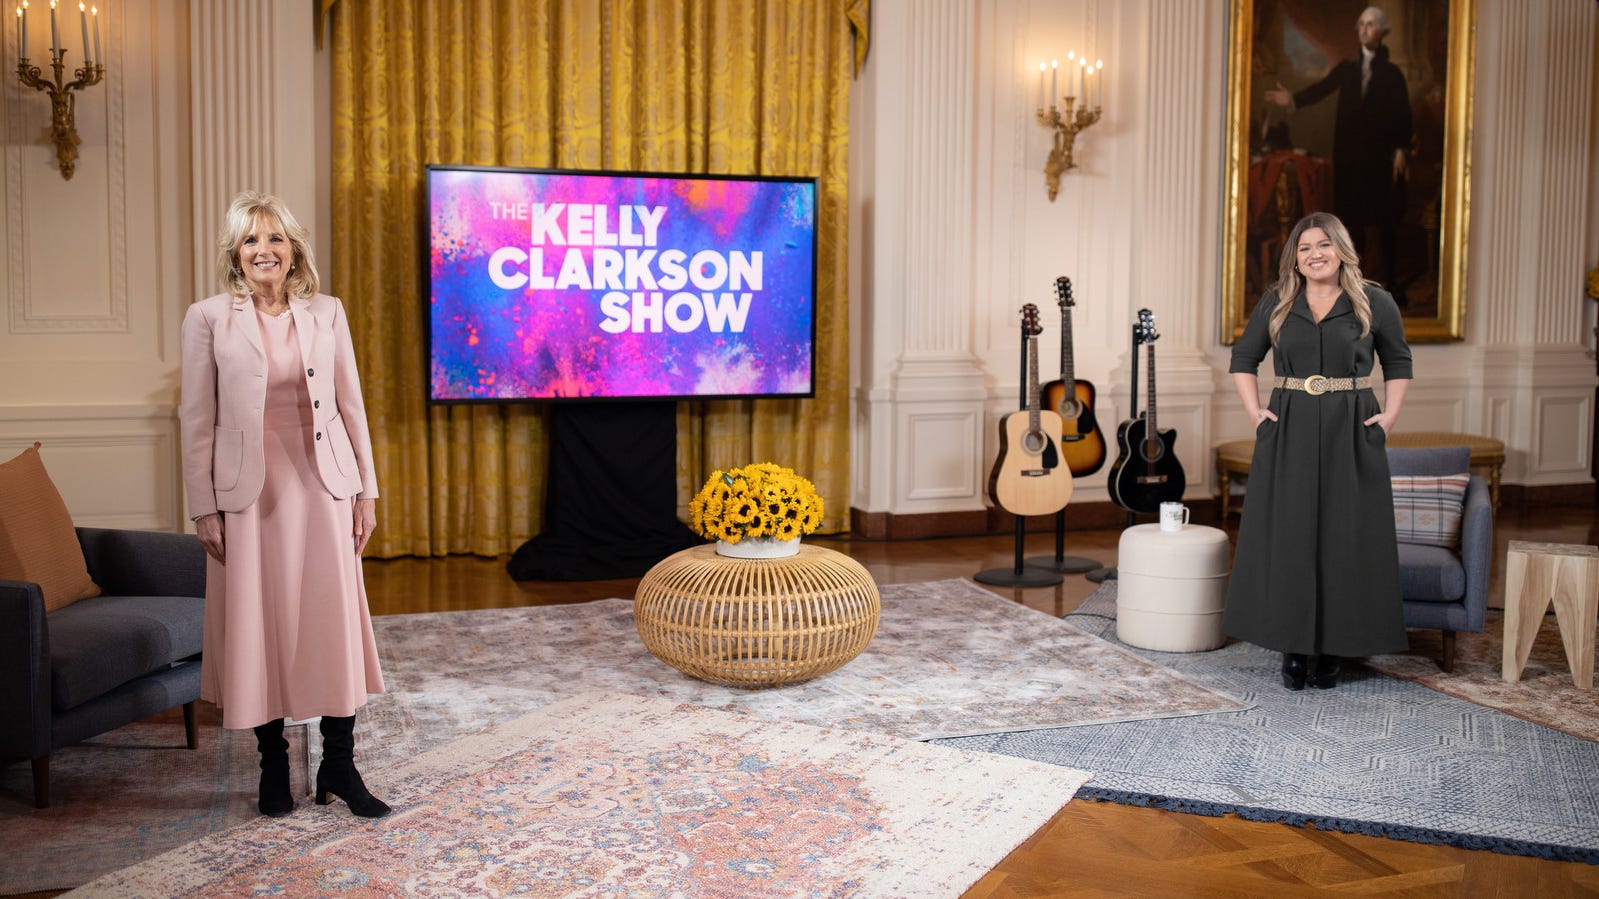 Jill Biden and Kelly Clarkson have heart-to-heart about divorce in first solo TV chat - USA TODAY